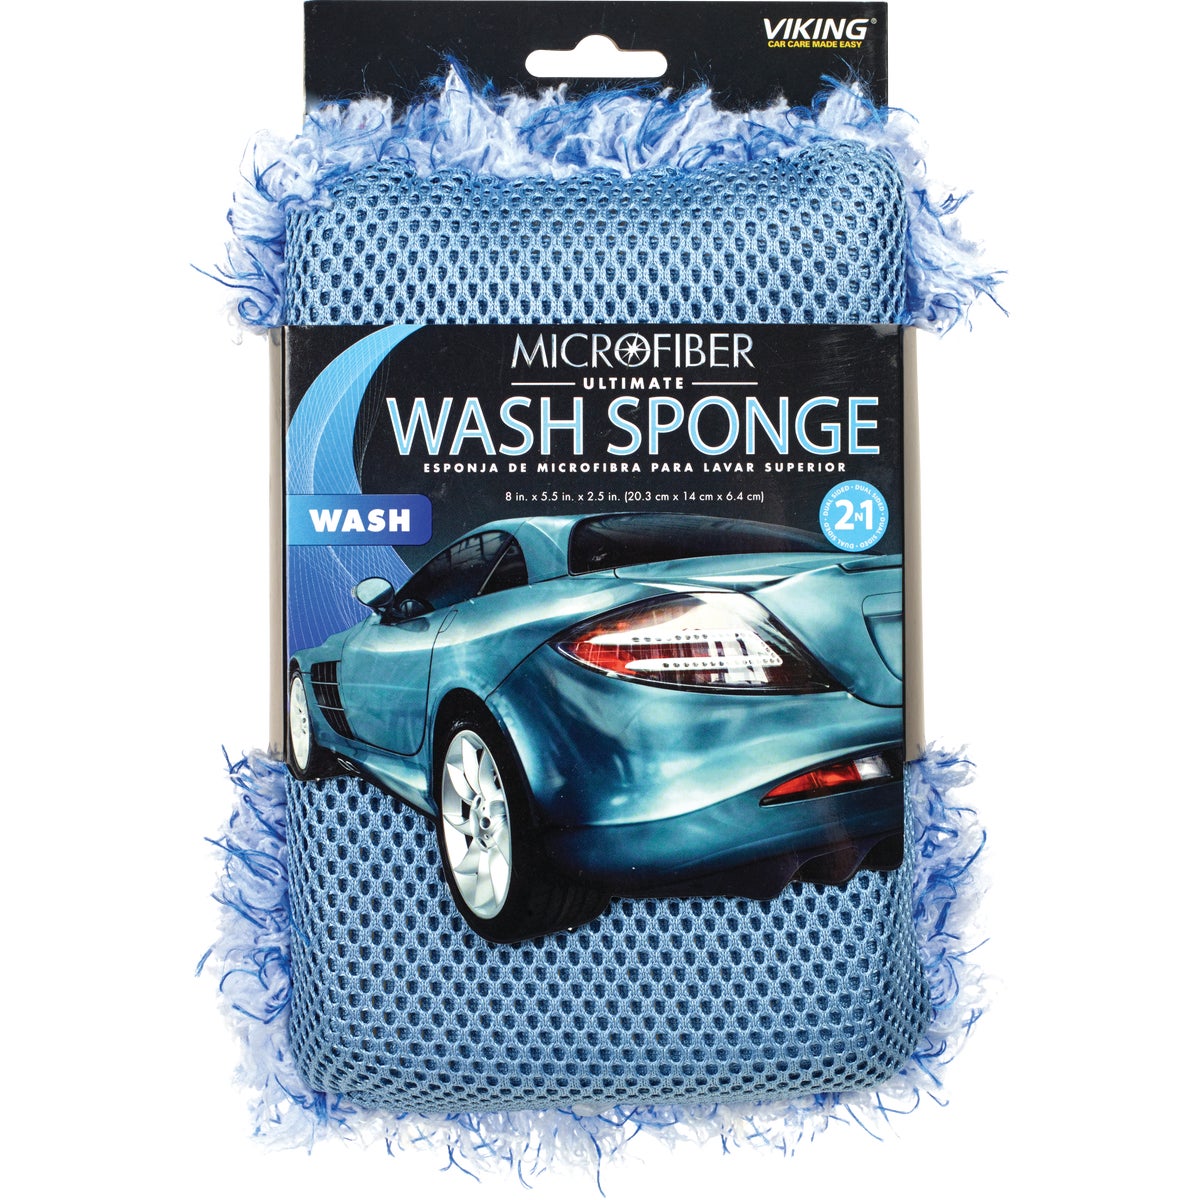 Item 575437, 2N1 Ultimate Wash Sponge features luxuriously soft microfiber to provide 